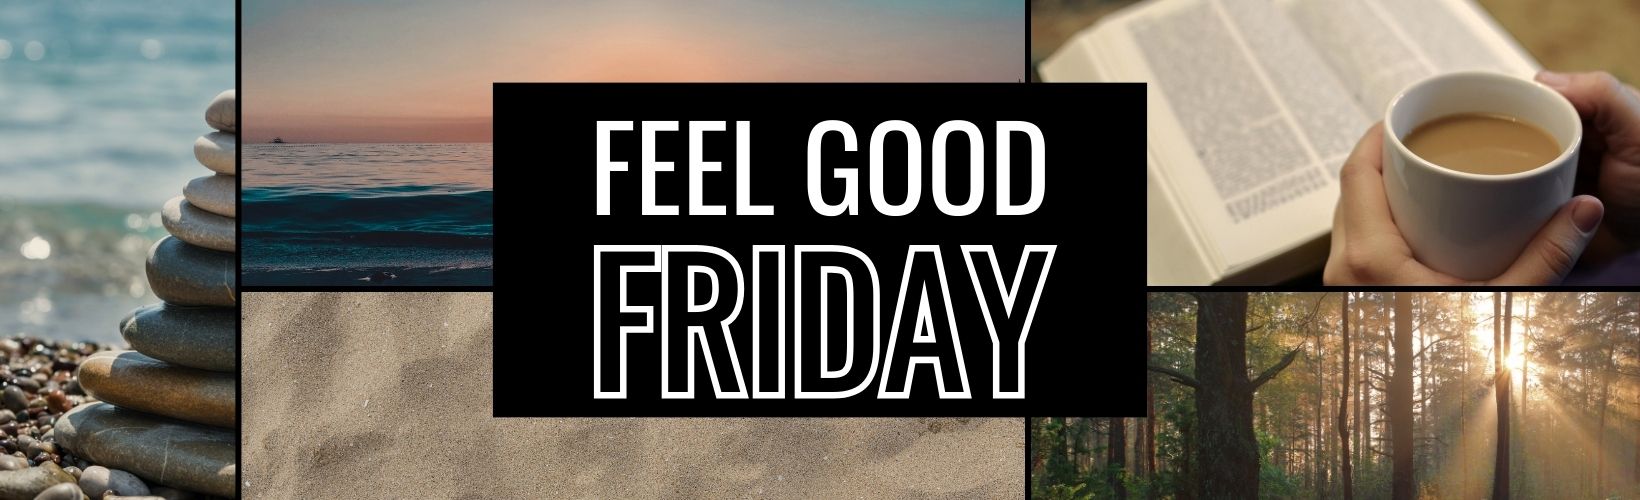 Feel Good Friday: Finding Joy in the Season of Giving